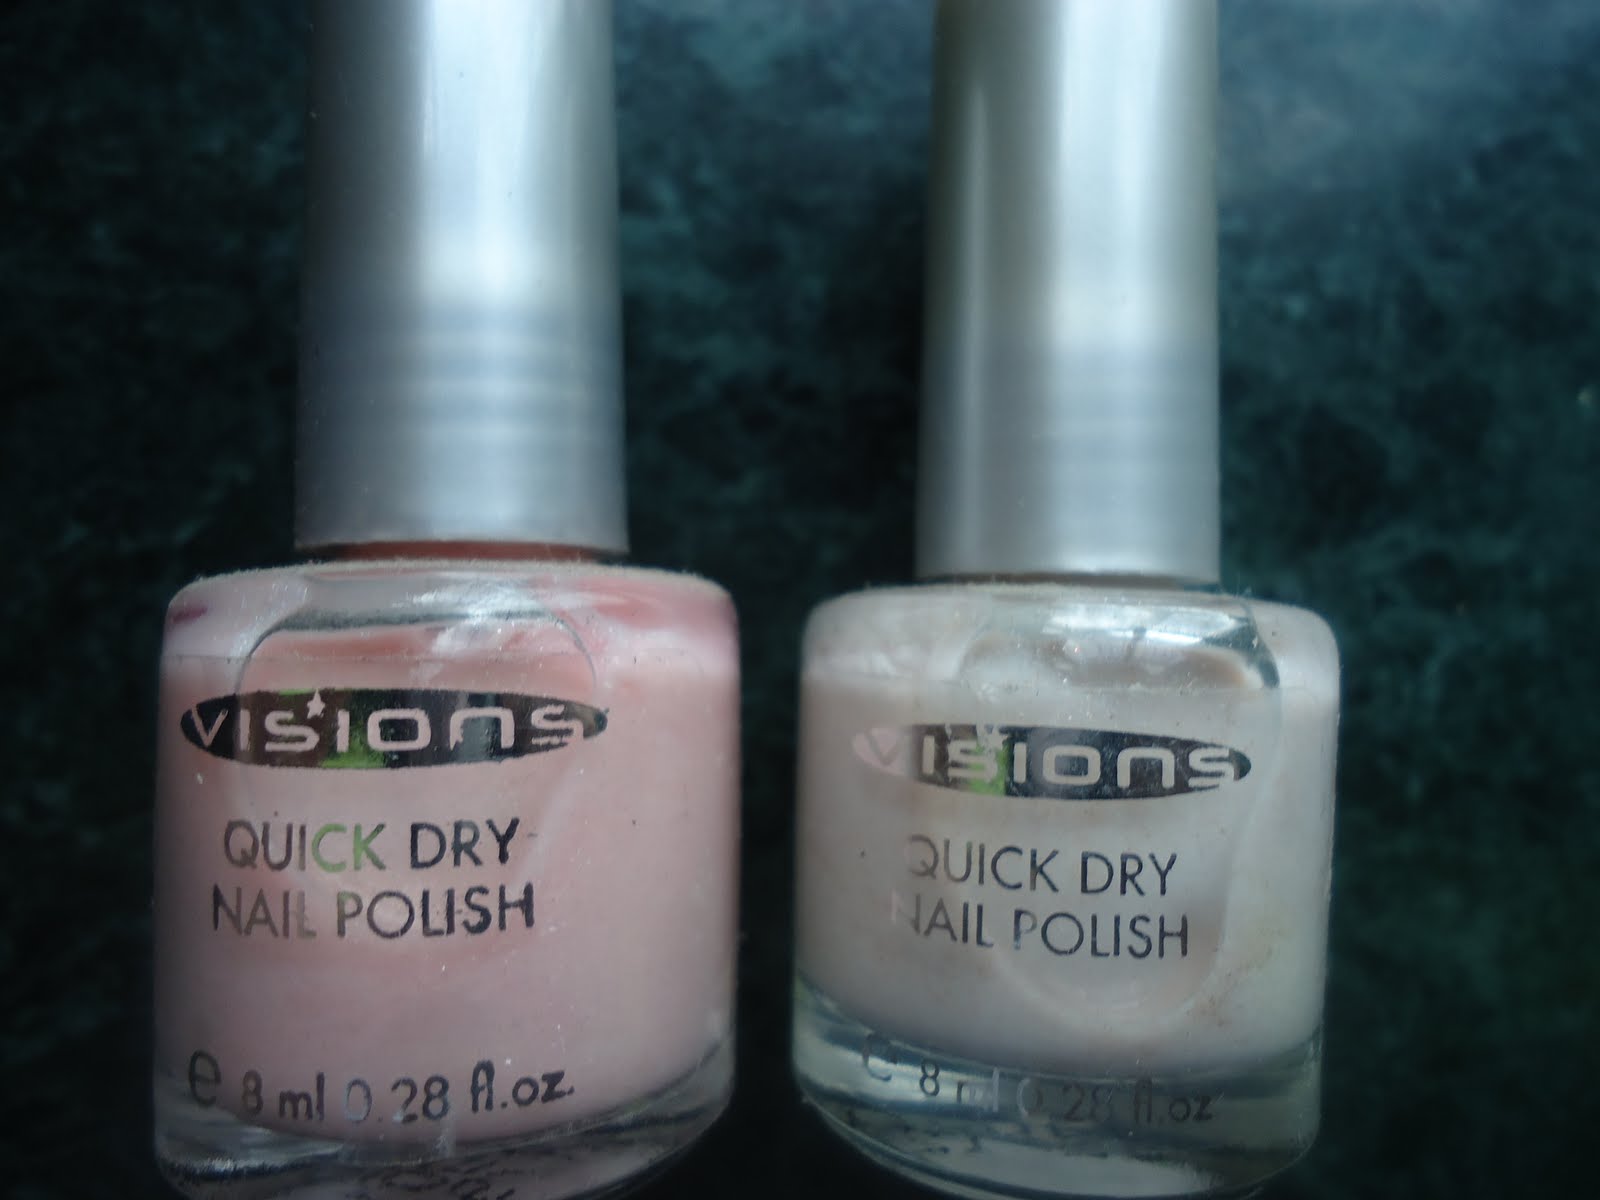 Oriflame Visions Nail Polish Review, Swatches - New Love - Makeup